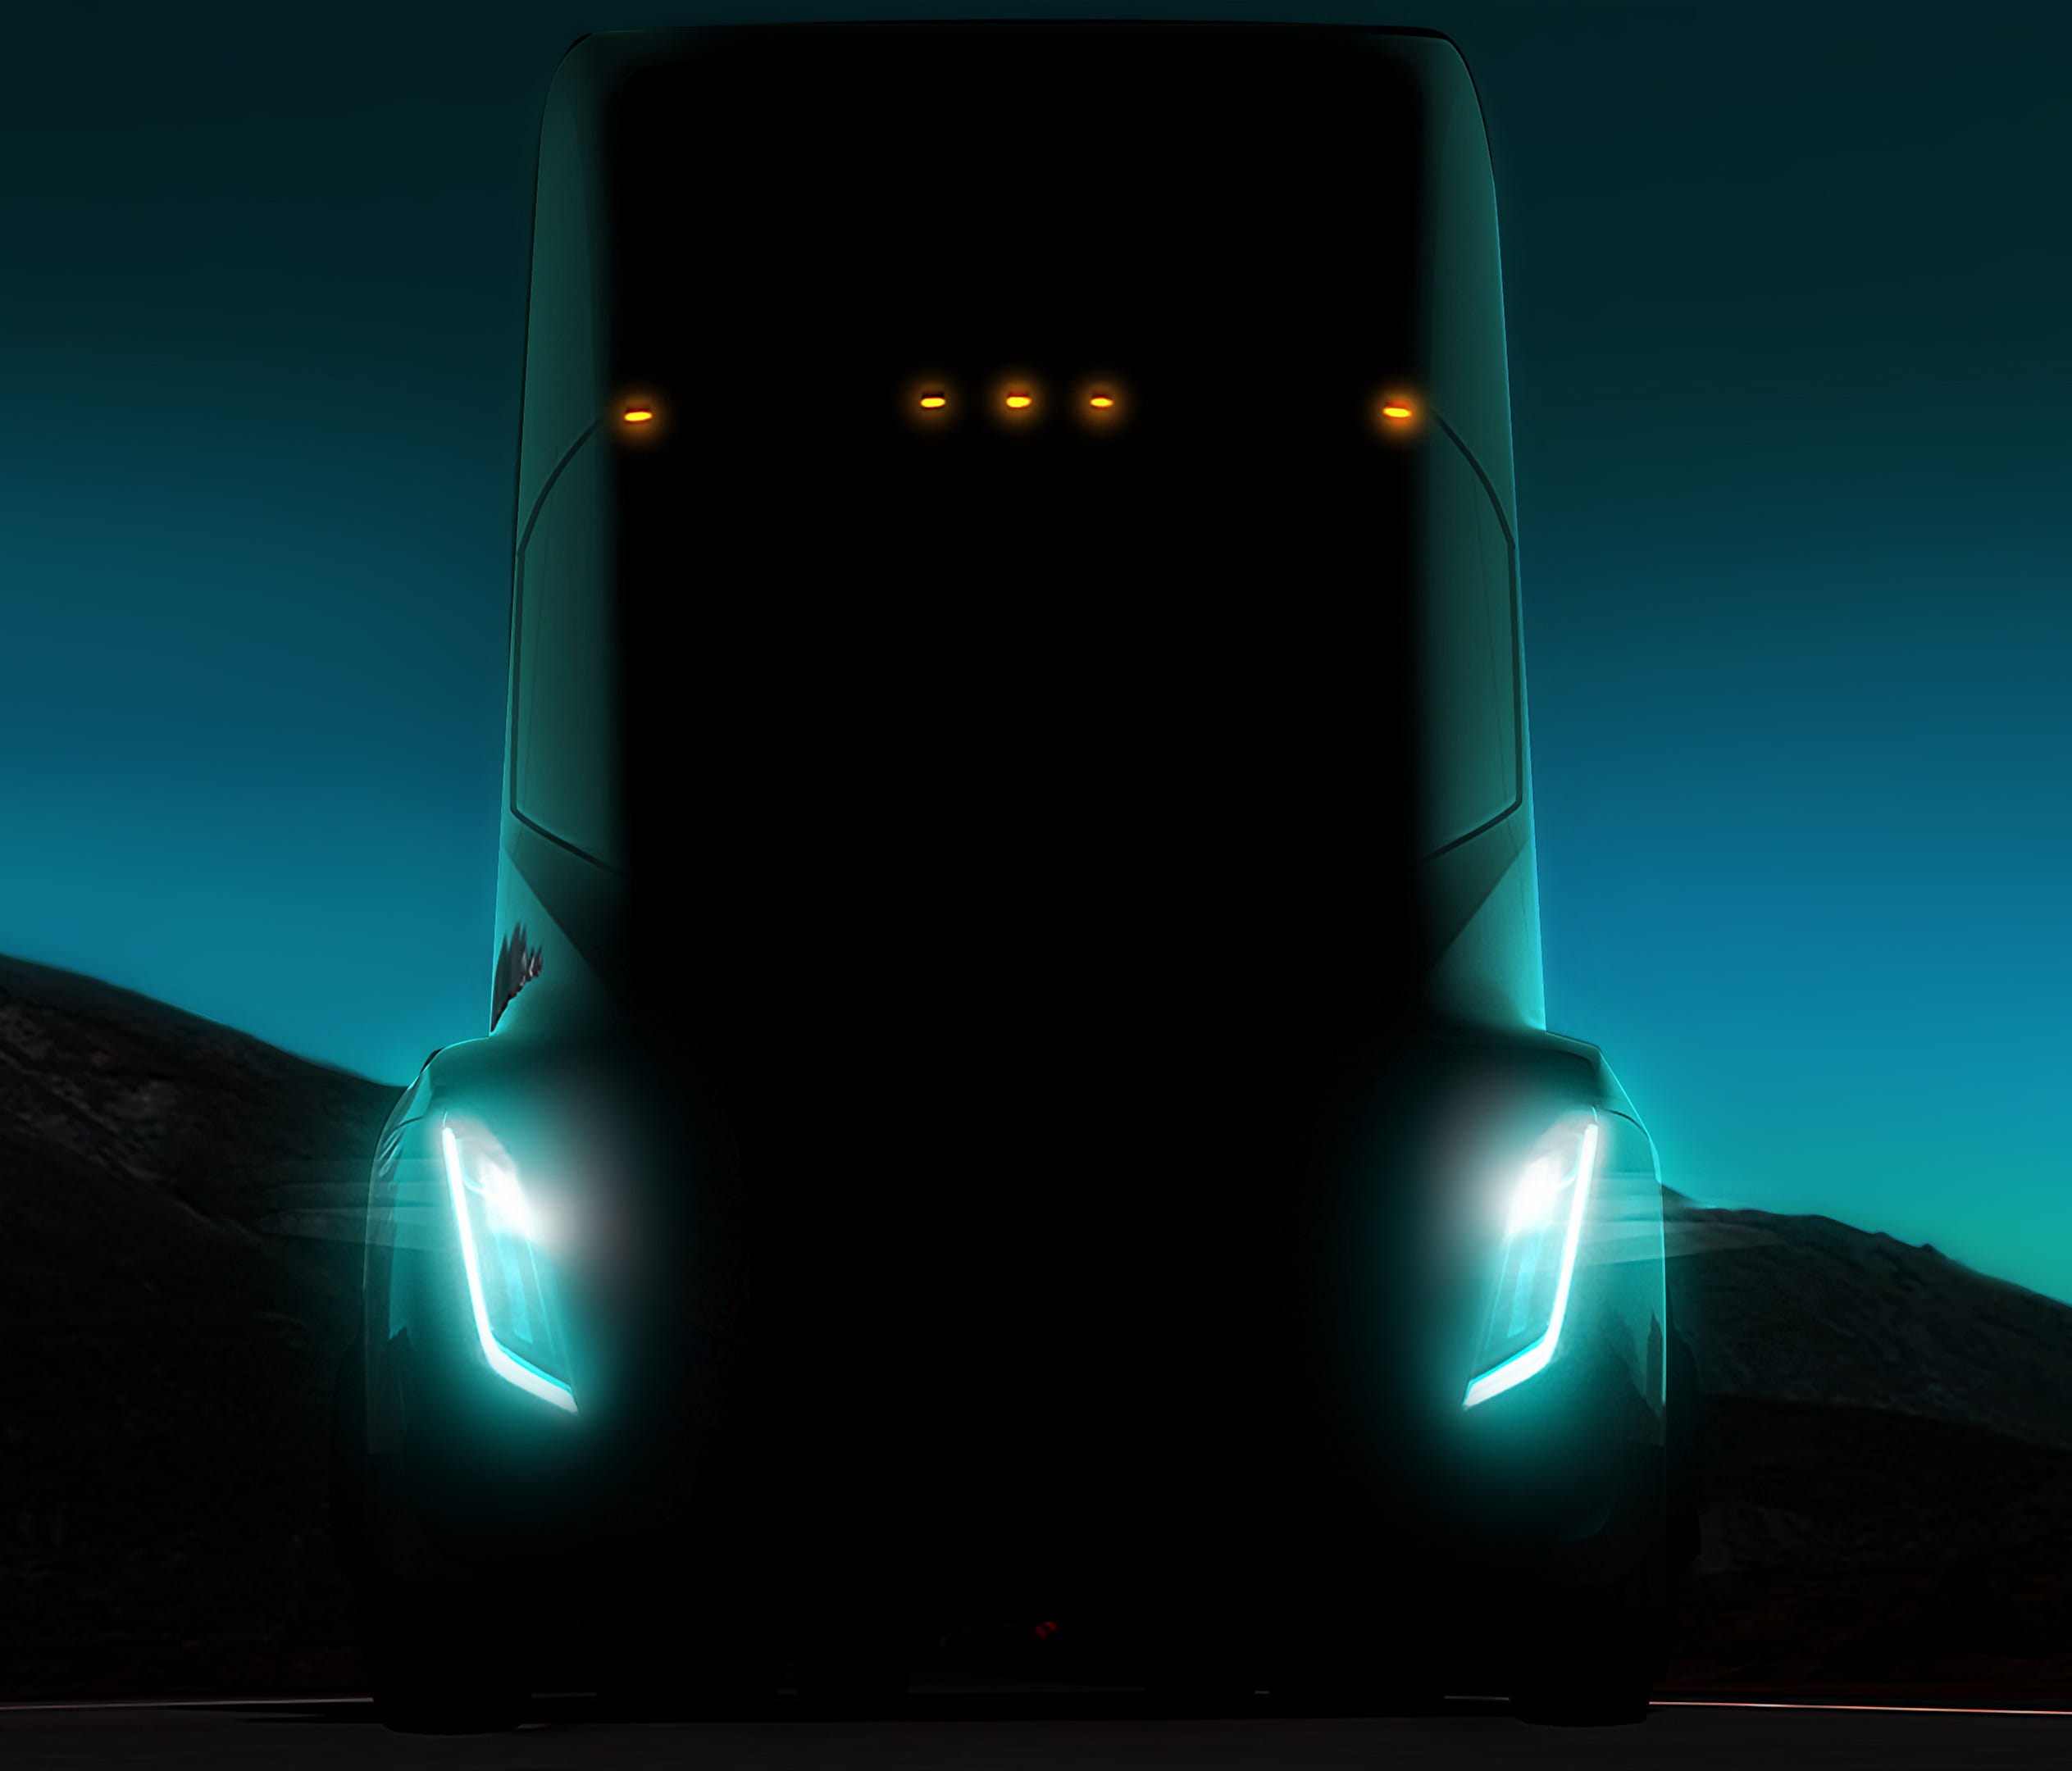 Tesla has unveiled two prototypes of its Tesla Semi, which uses Model 3 powertrains to drive four rear wheels, and offers drivers a spacious interior and a central seating position.